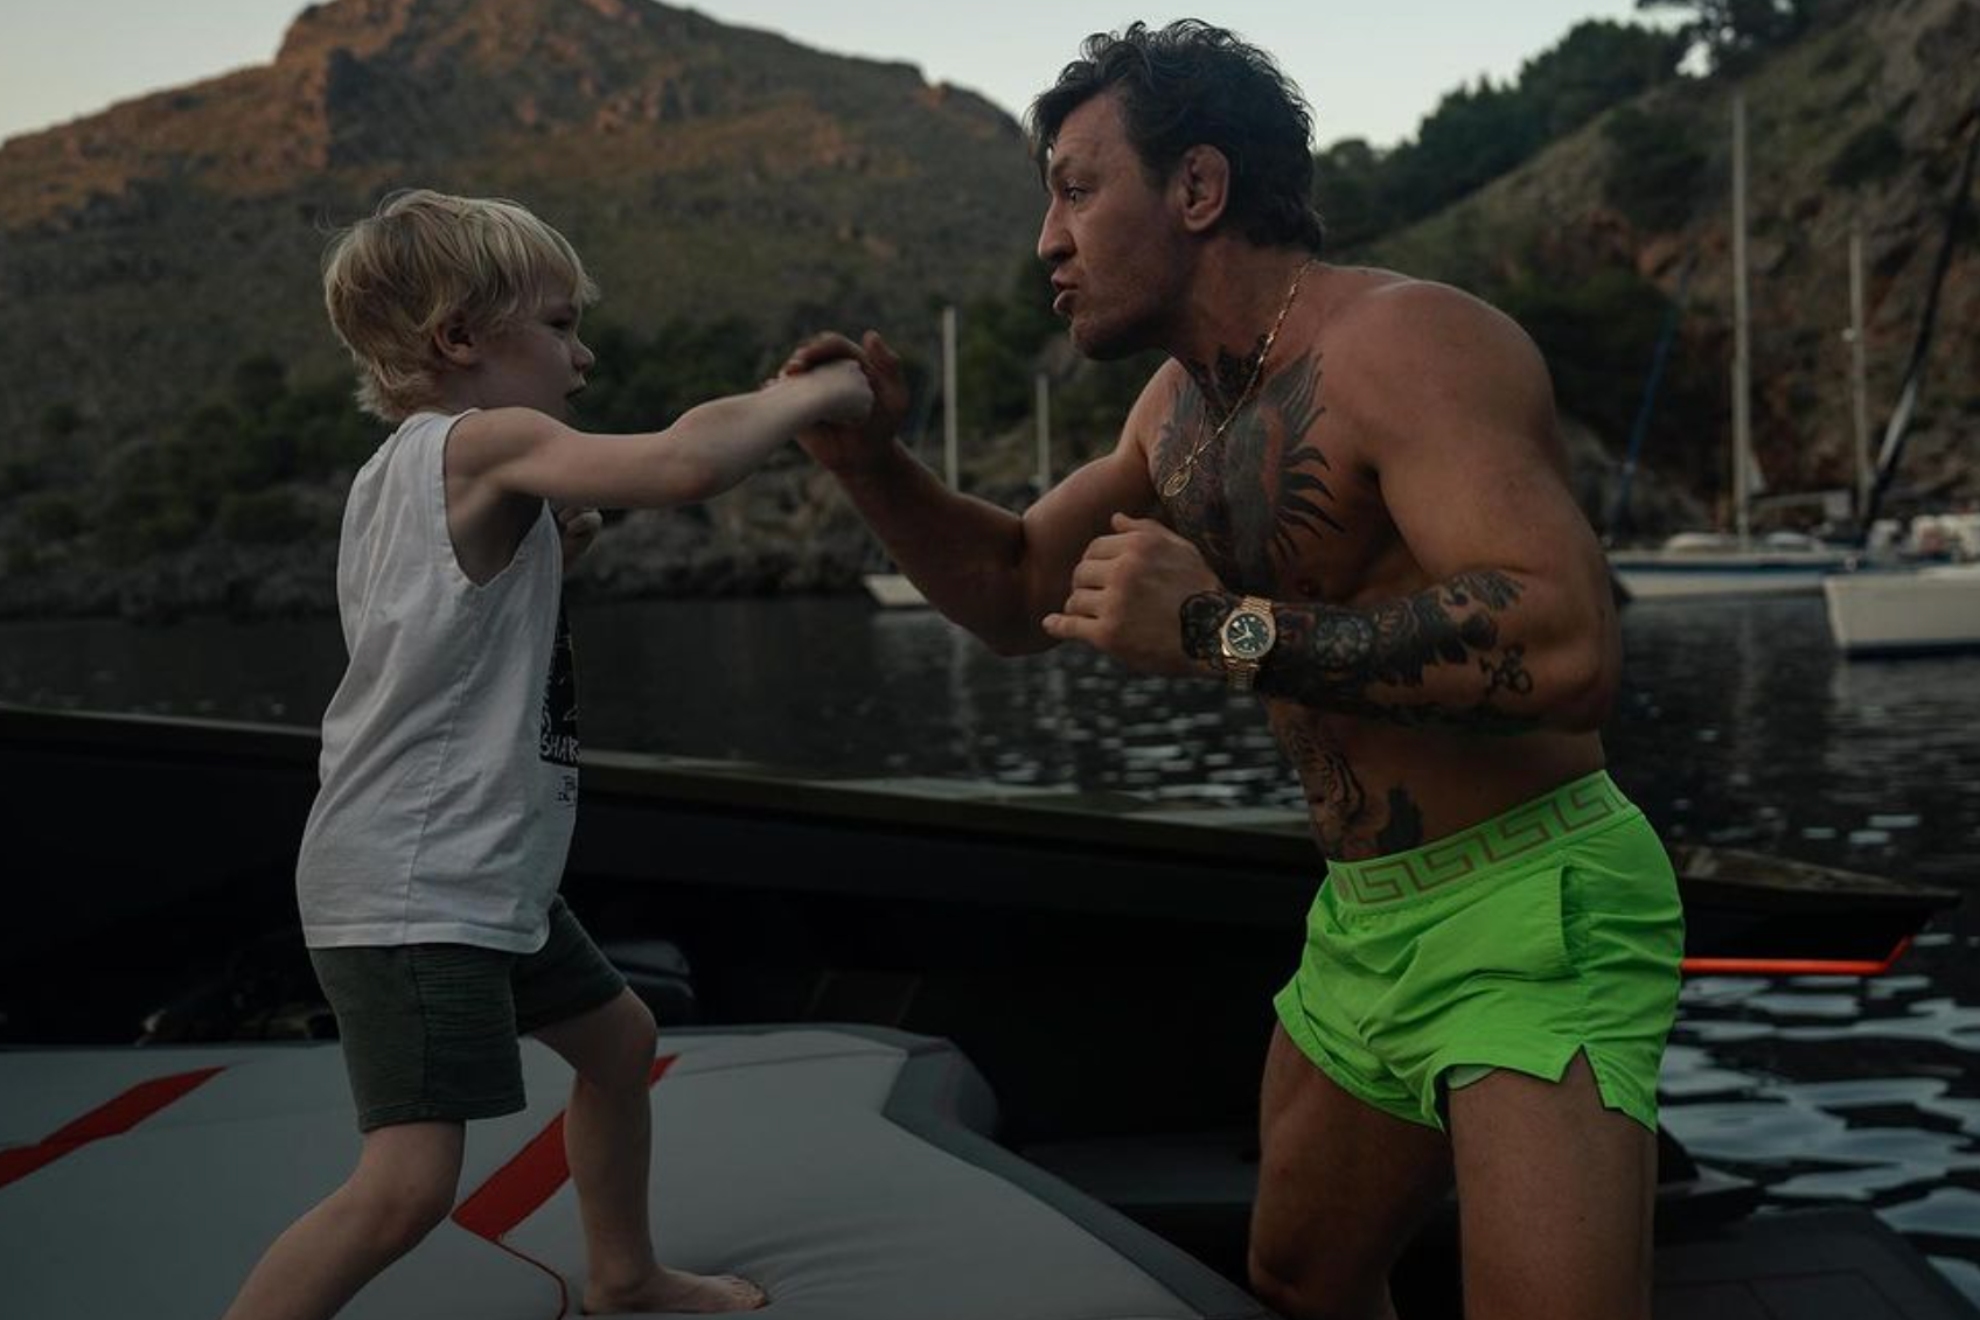 Conor McGregor training with his firstborn